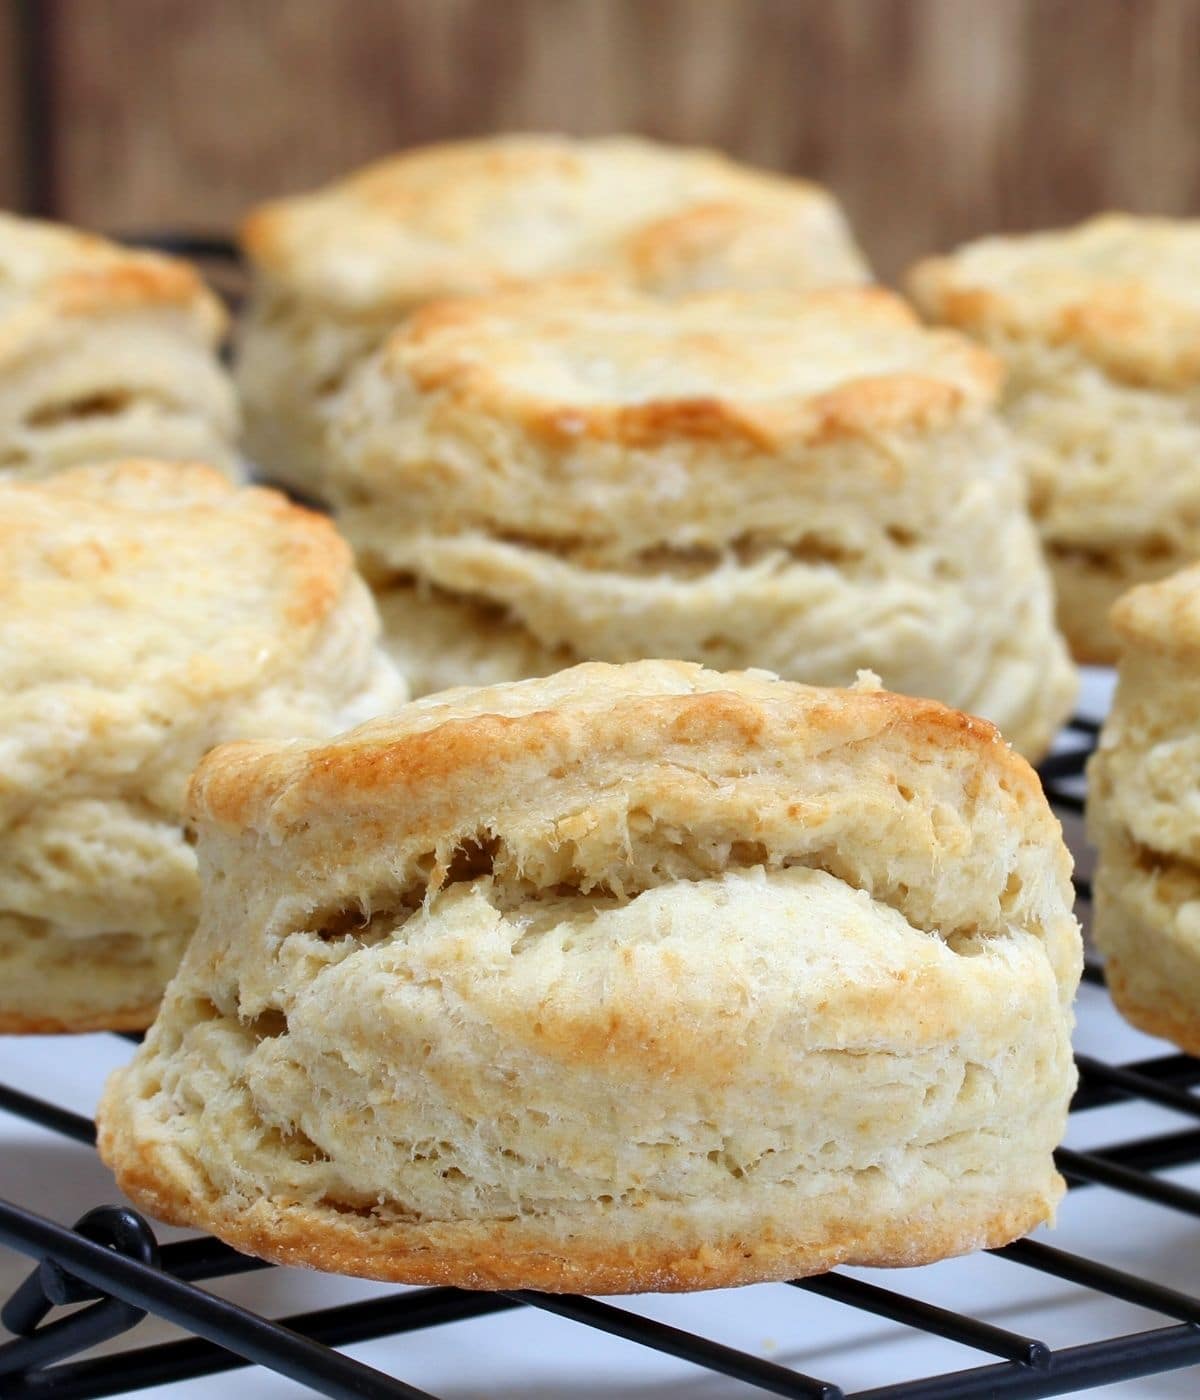 biscuits on a baking rack